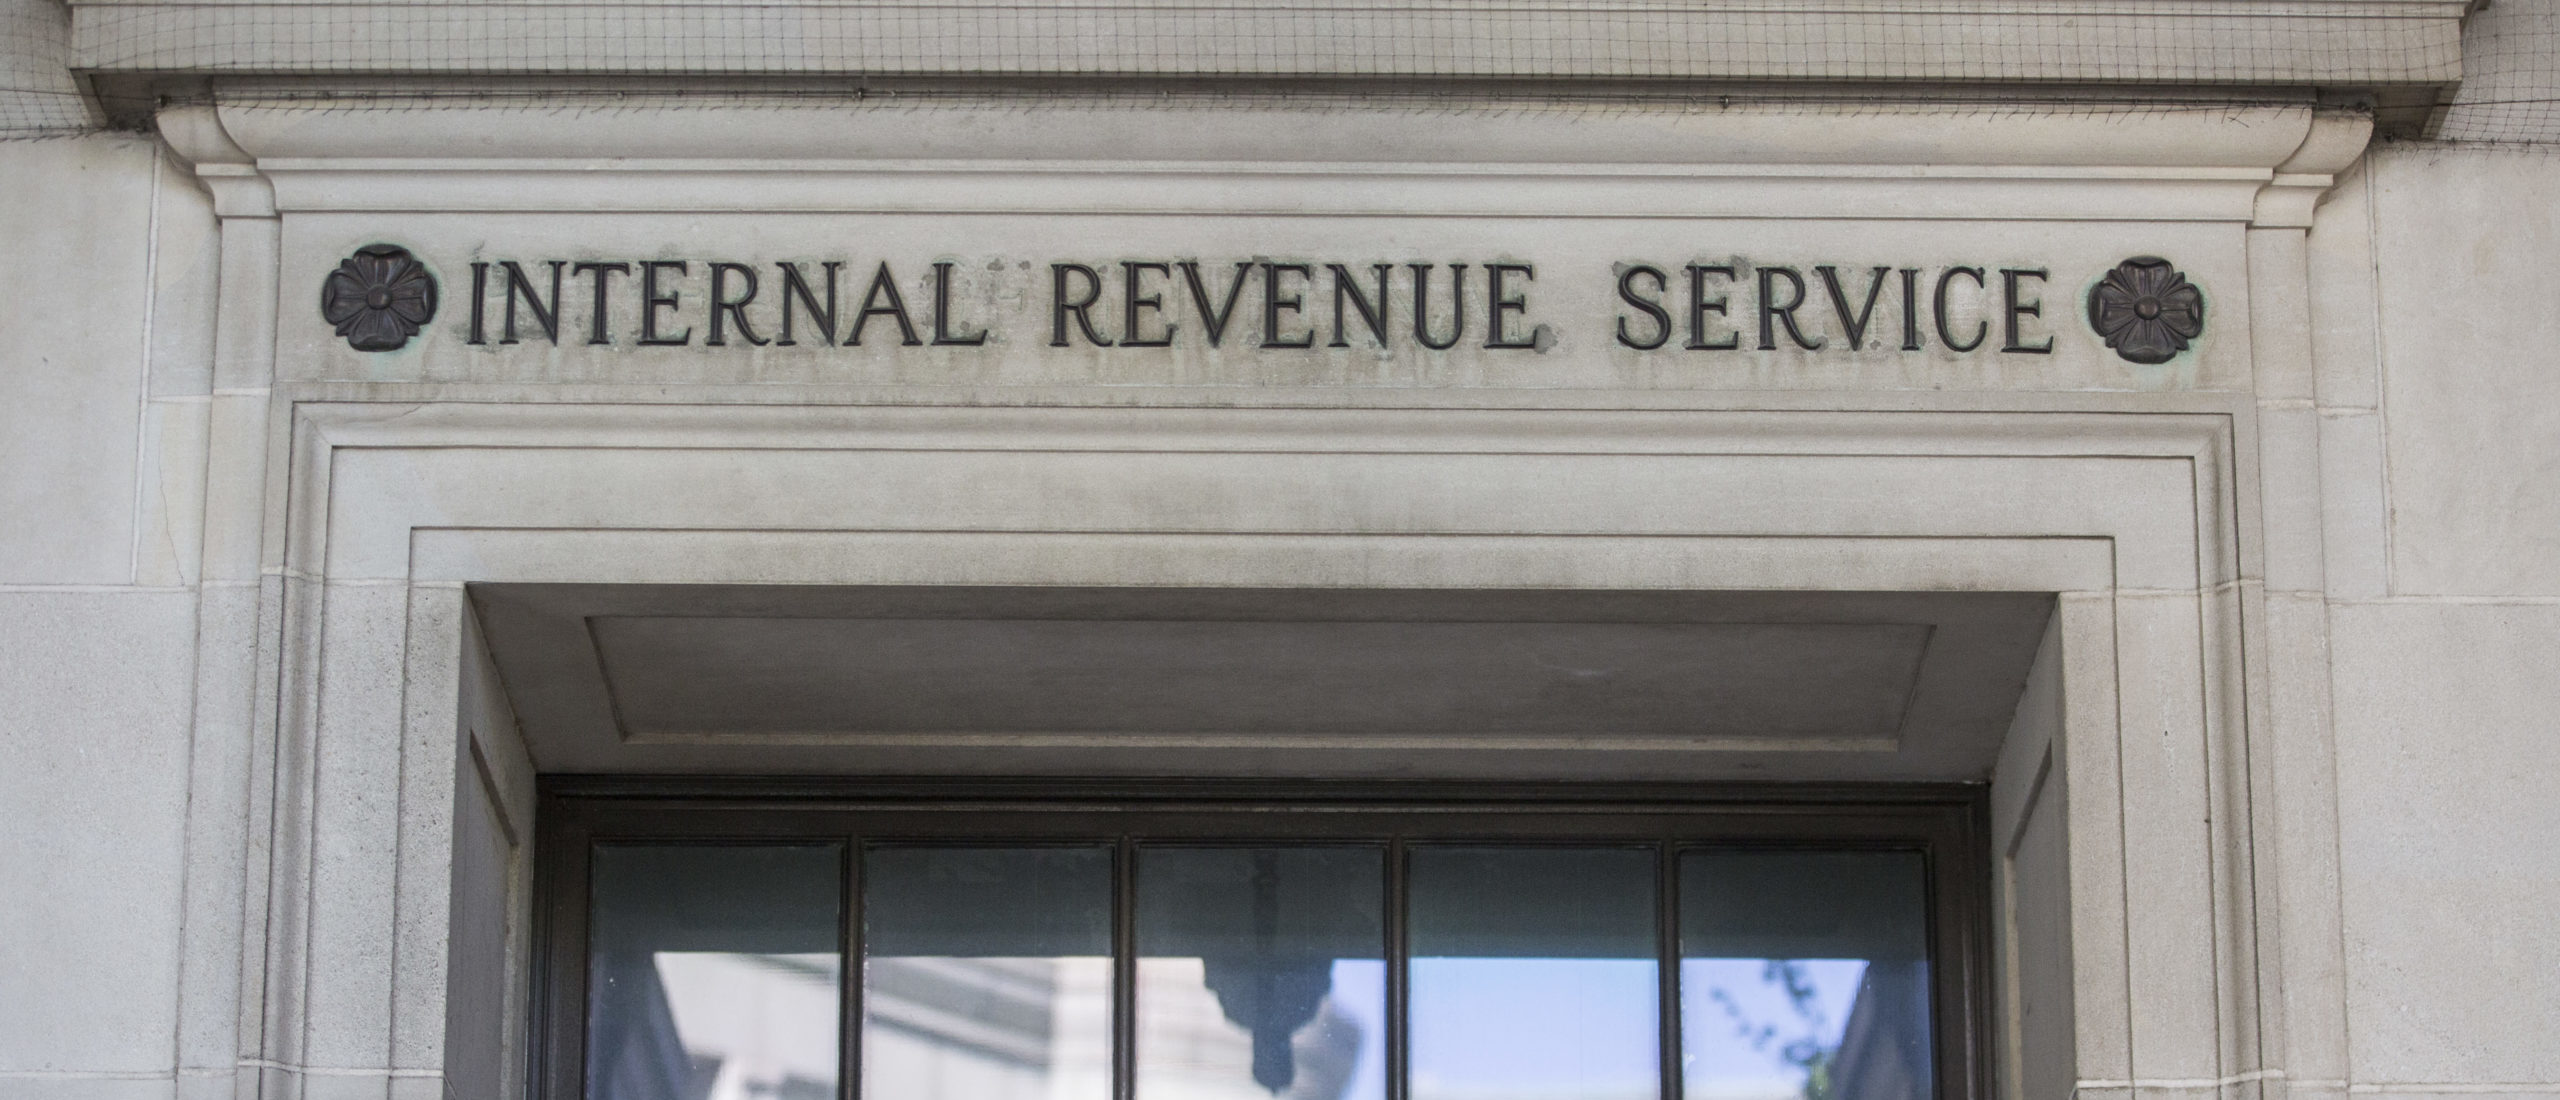 The Internal Revenue Service (IRS) building stands on April 15, 2019 in Washington, DC. (Photo by Zach Gibson/Getty Images)